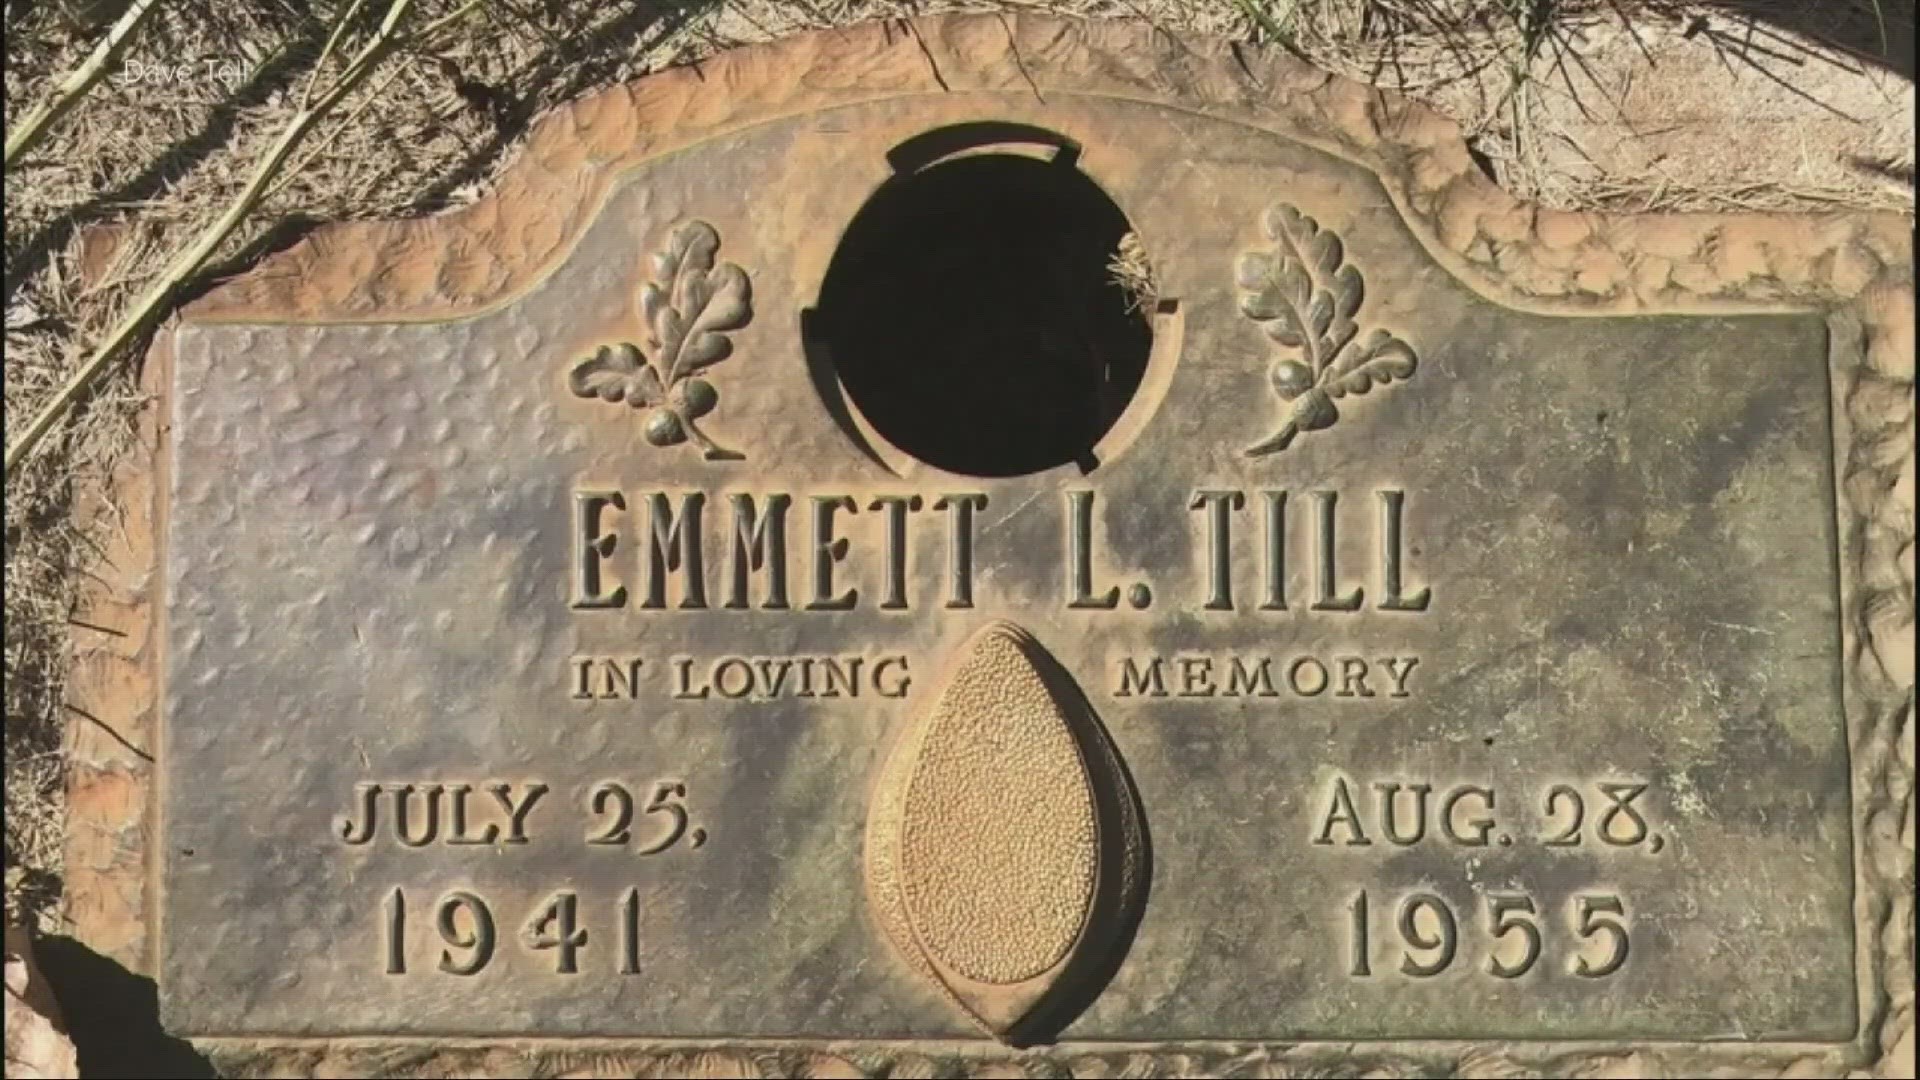 The torture and killing of Emmett Till in the Mississippi Delta became a catalyst for the civil rights movement after his mother insisted on an open-casket funeral.